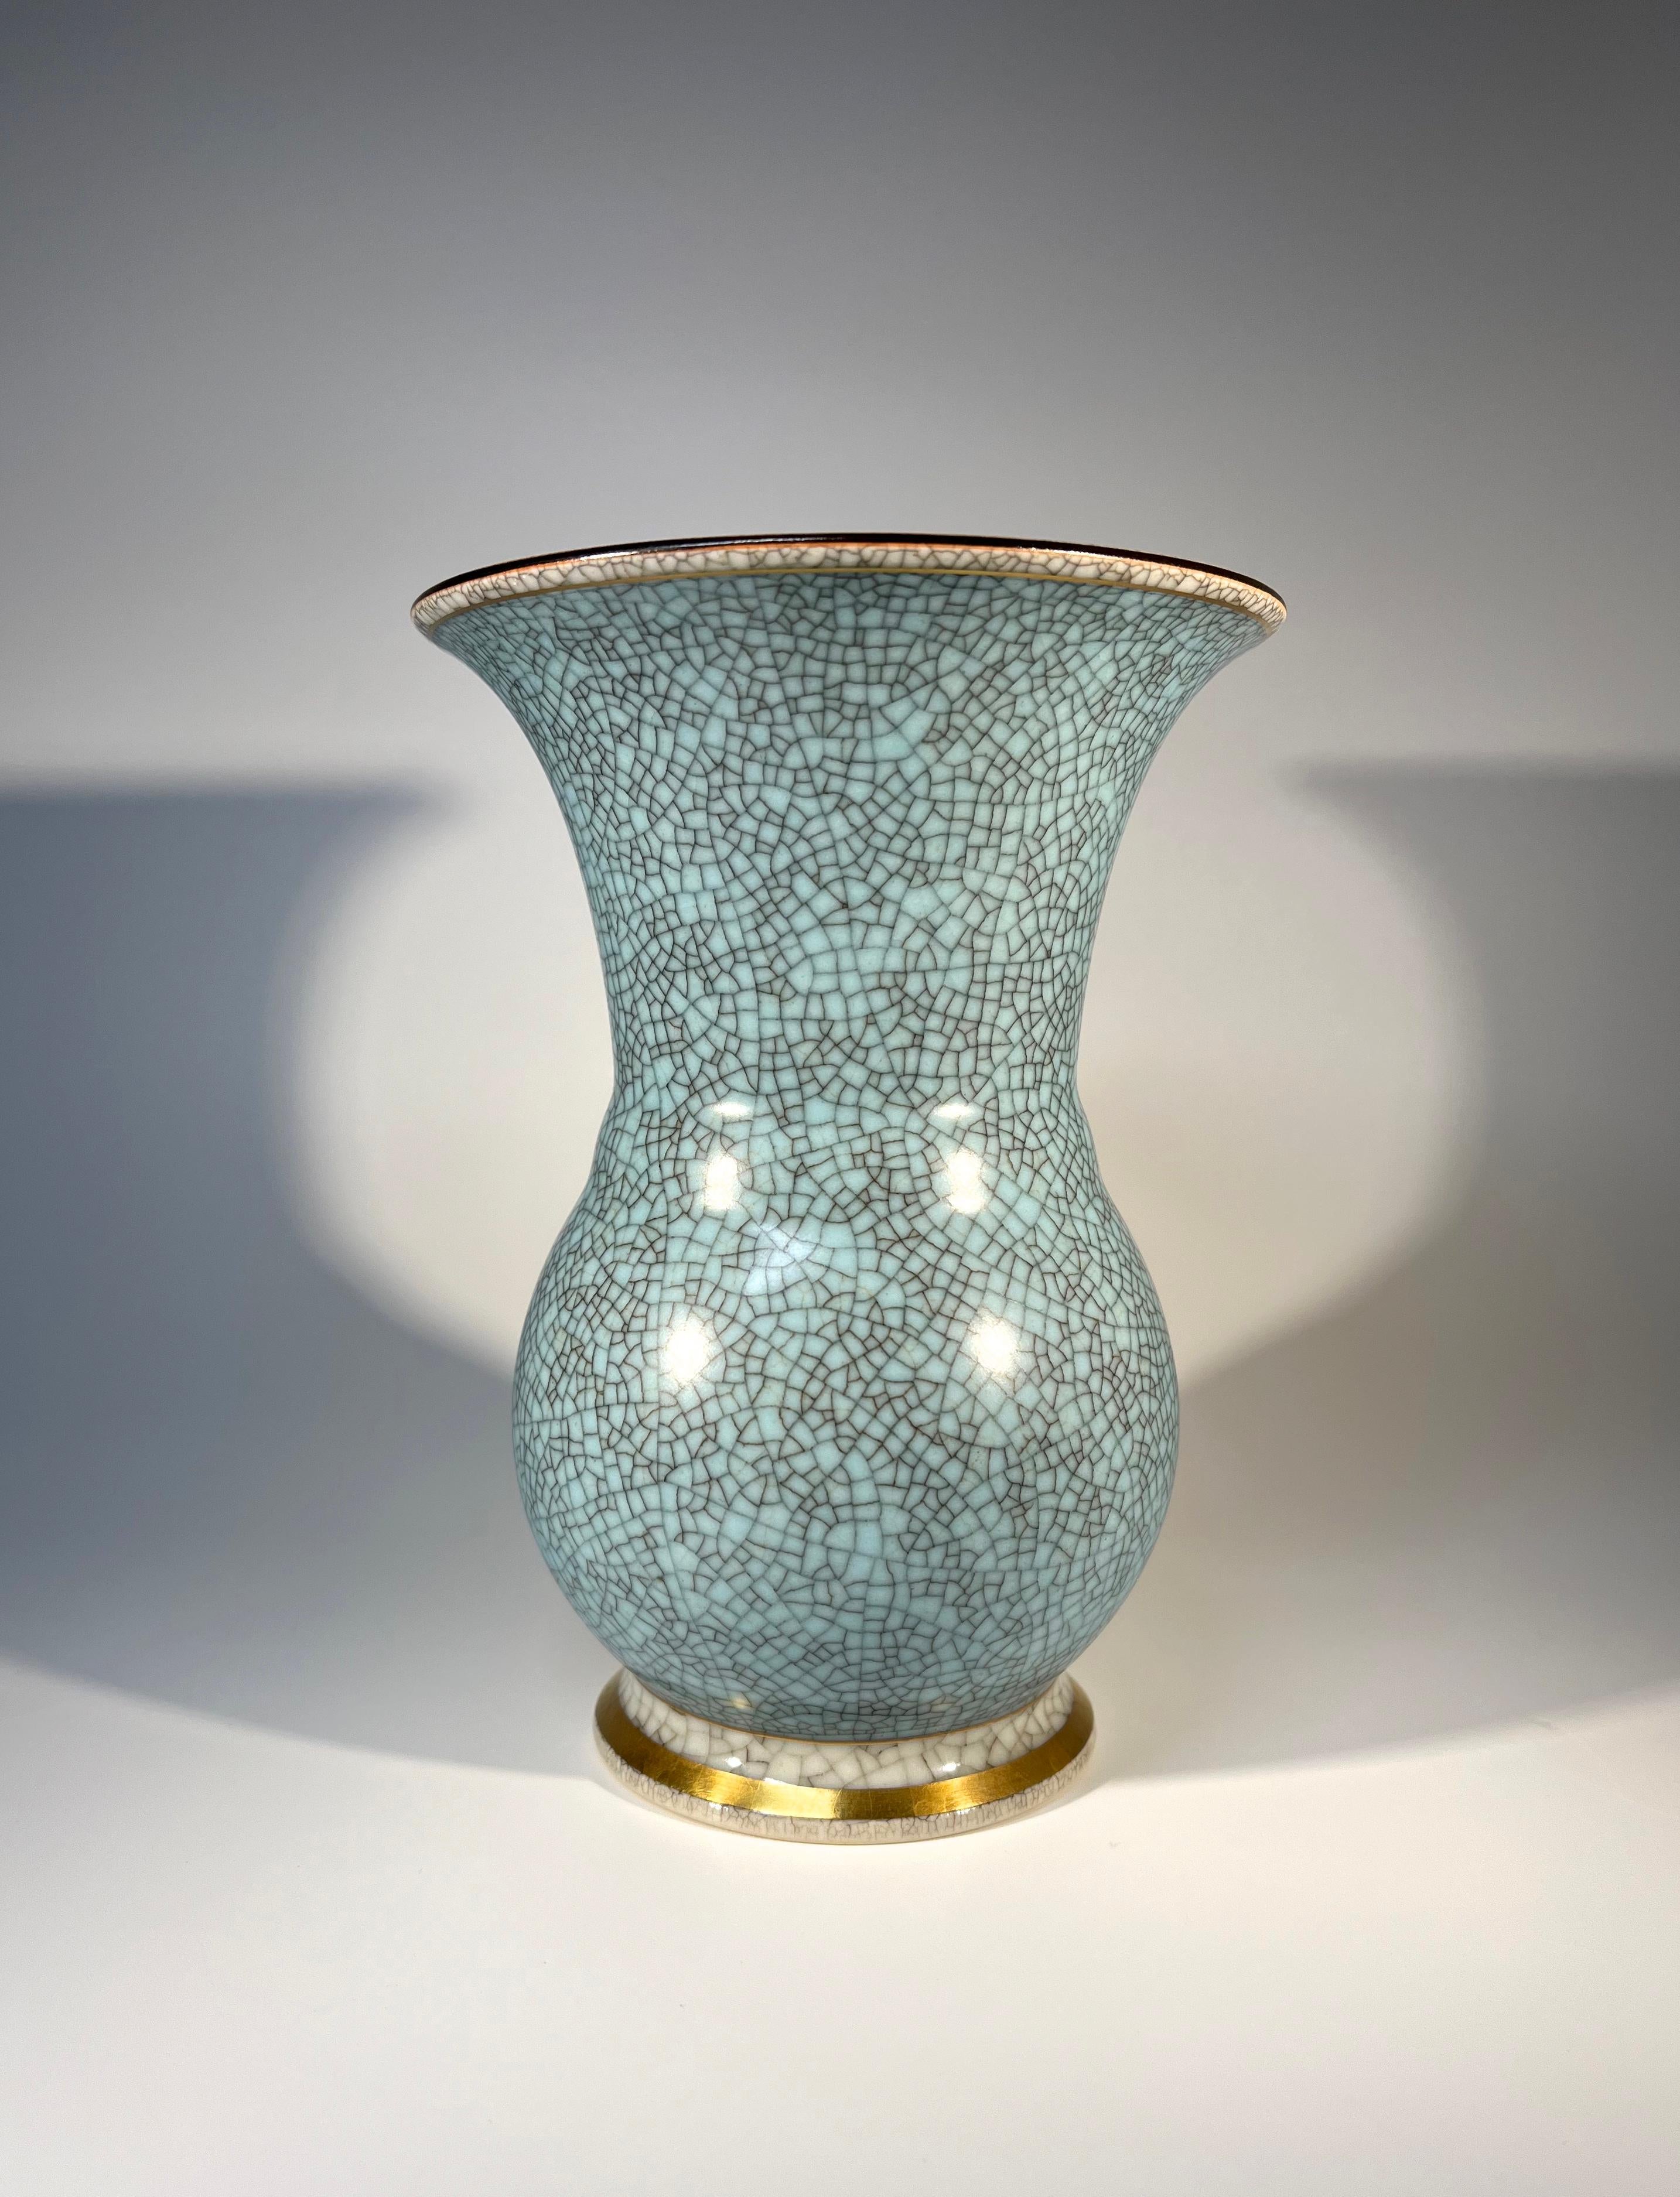 Powder blue Royal Copenhagen crackle glazed porcelain vase with gilded banding 
Notable, well defined dark crackle exterior
Designed by Thorkild Olsen
Circa 1954
Stamped and numbered 2491
Height 6.75 inch, Diameter 4.75 inch
In good condition
Wear